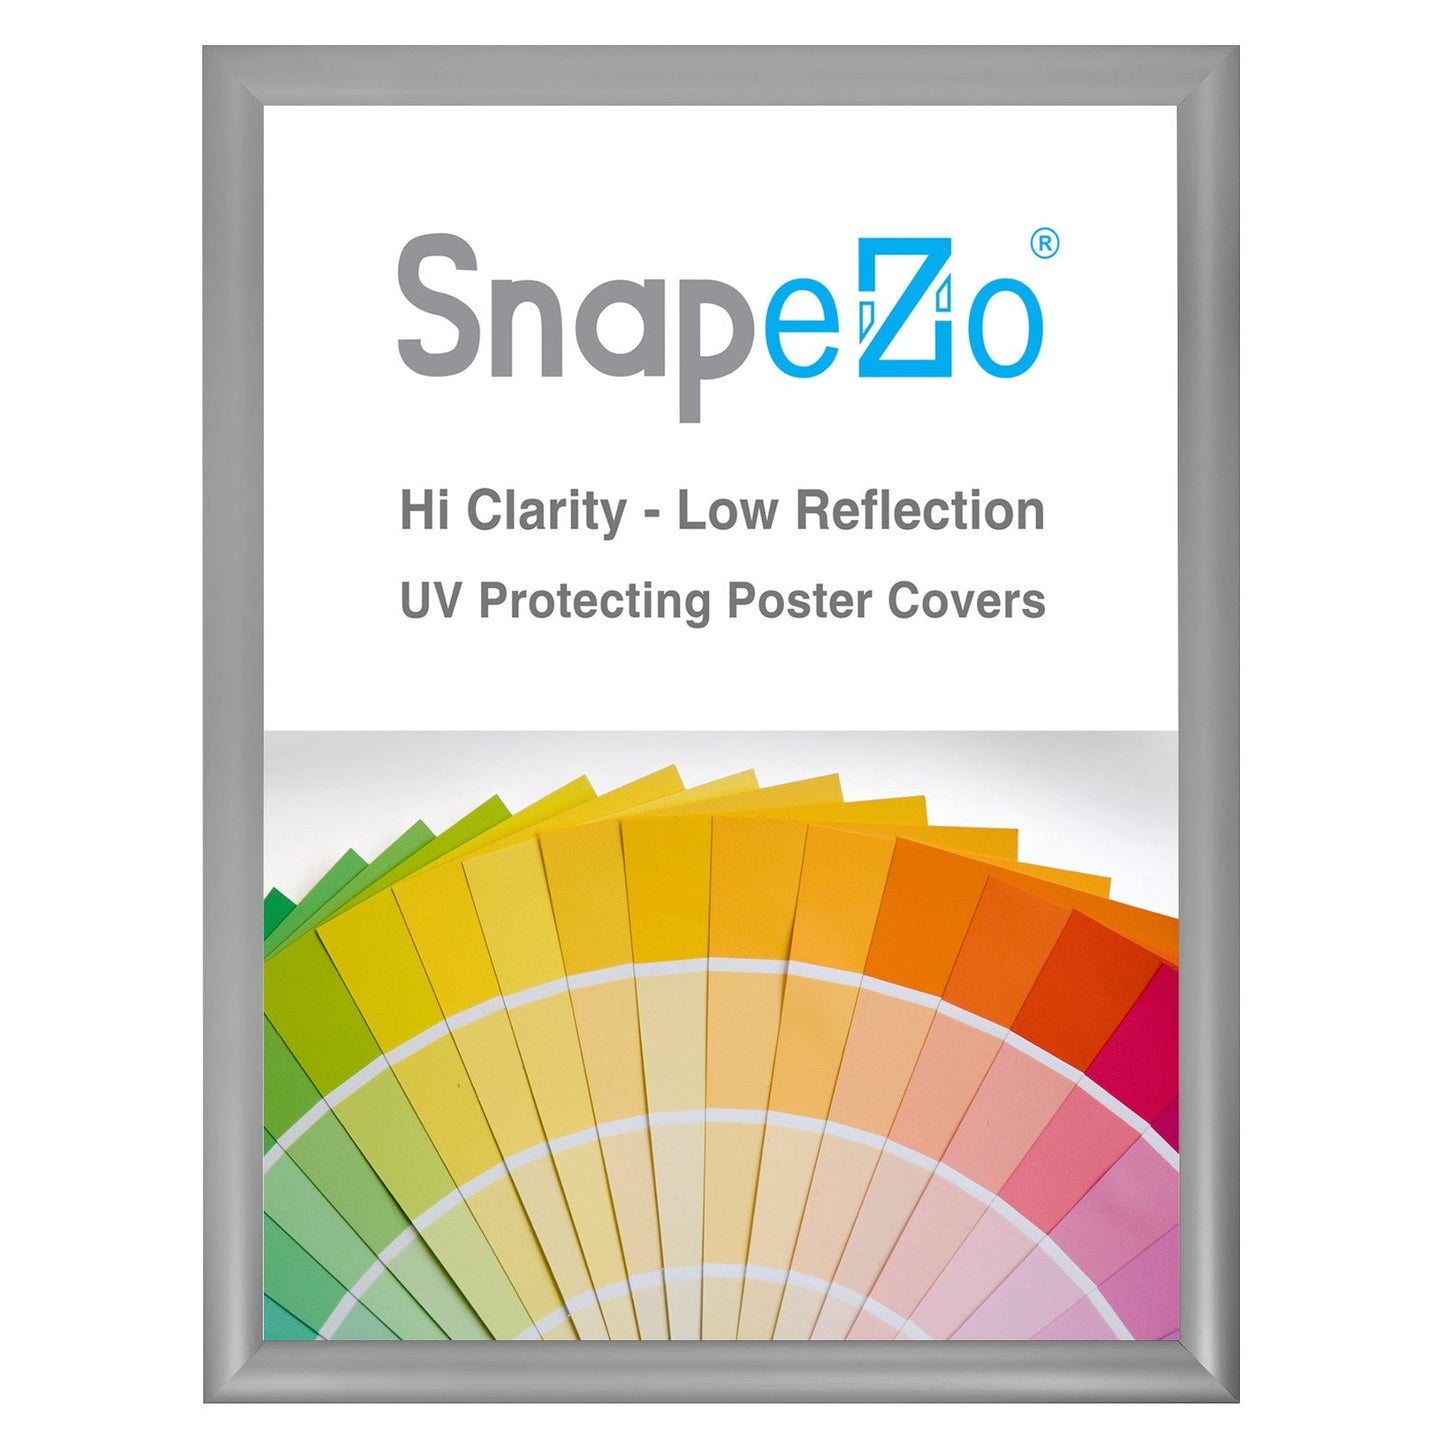 Load image into Gallery viewer, 19x24 Silver SnapeZo® Snap Frame - 1.2&amp;quot; Profile
